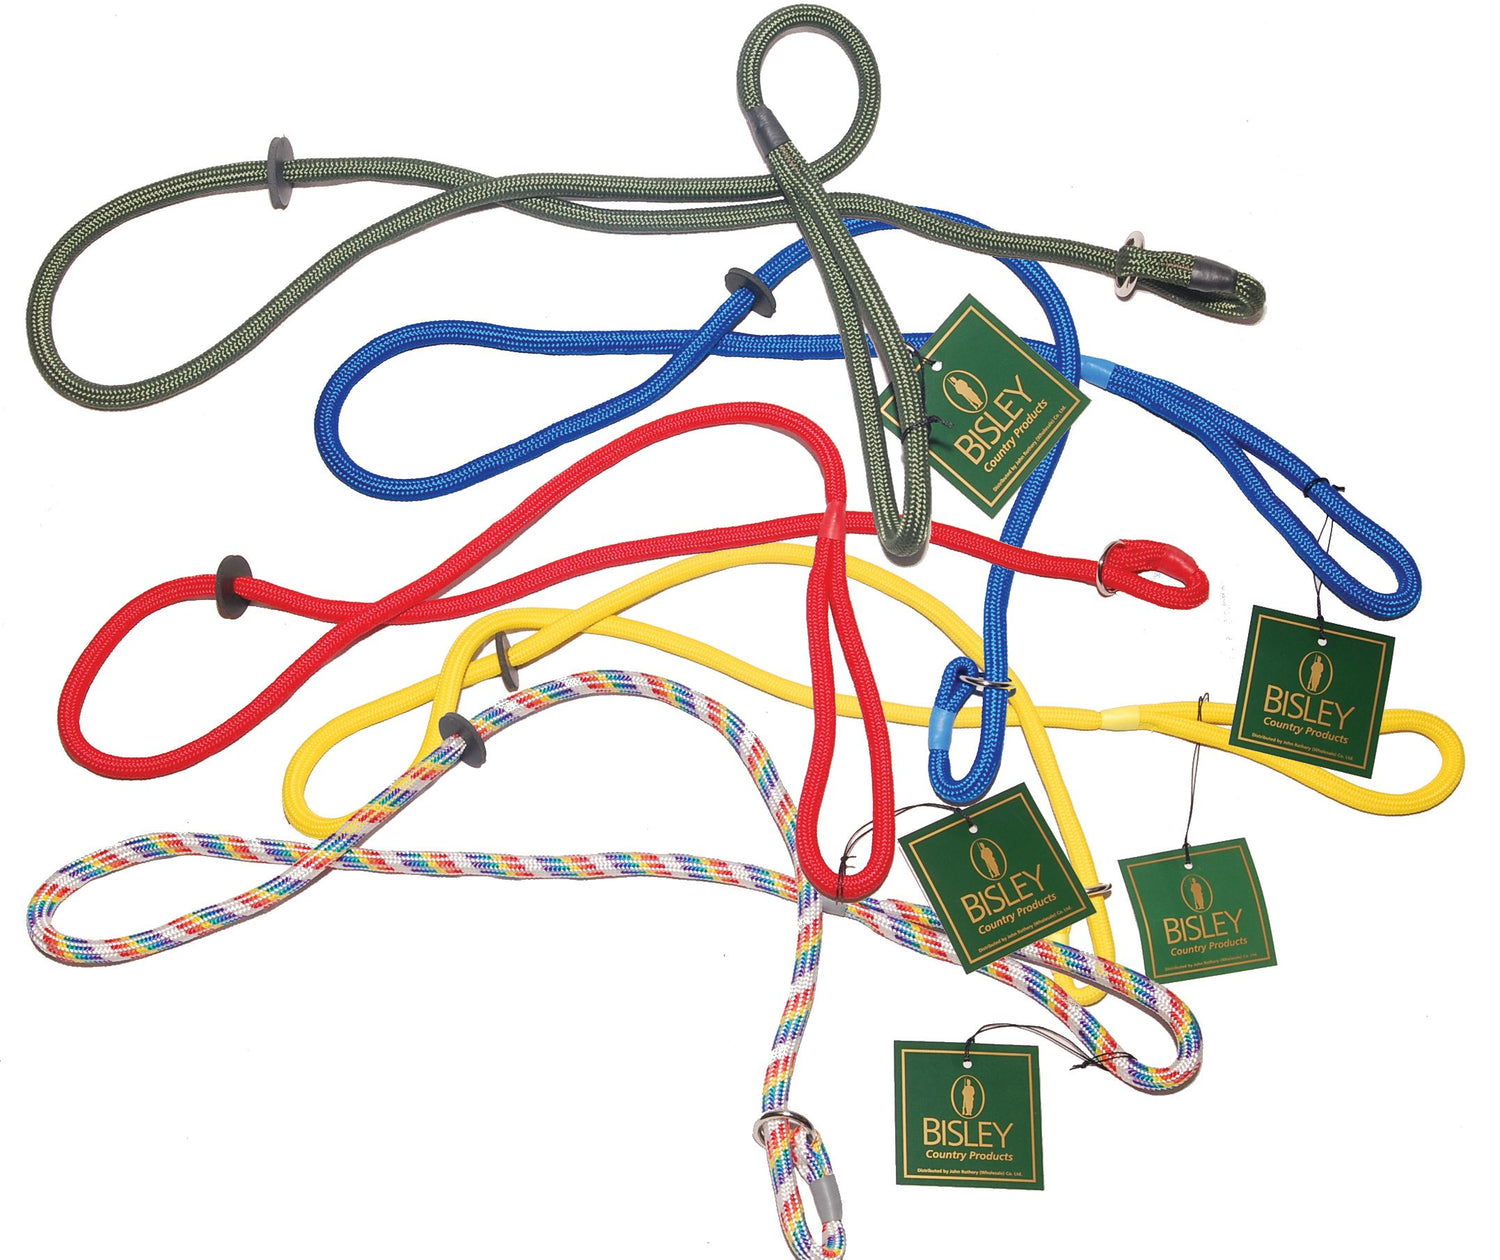 Bisley Loose Slip Lead in Green, Red, Blue, Yellow, Multicolour